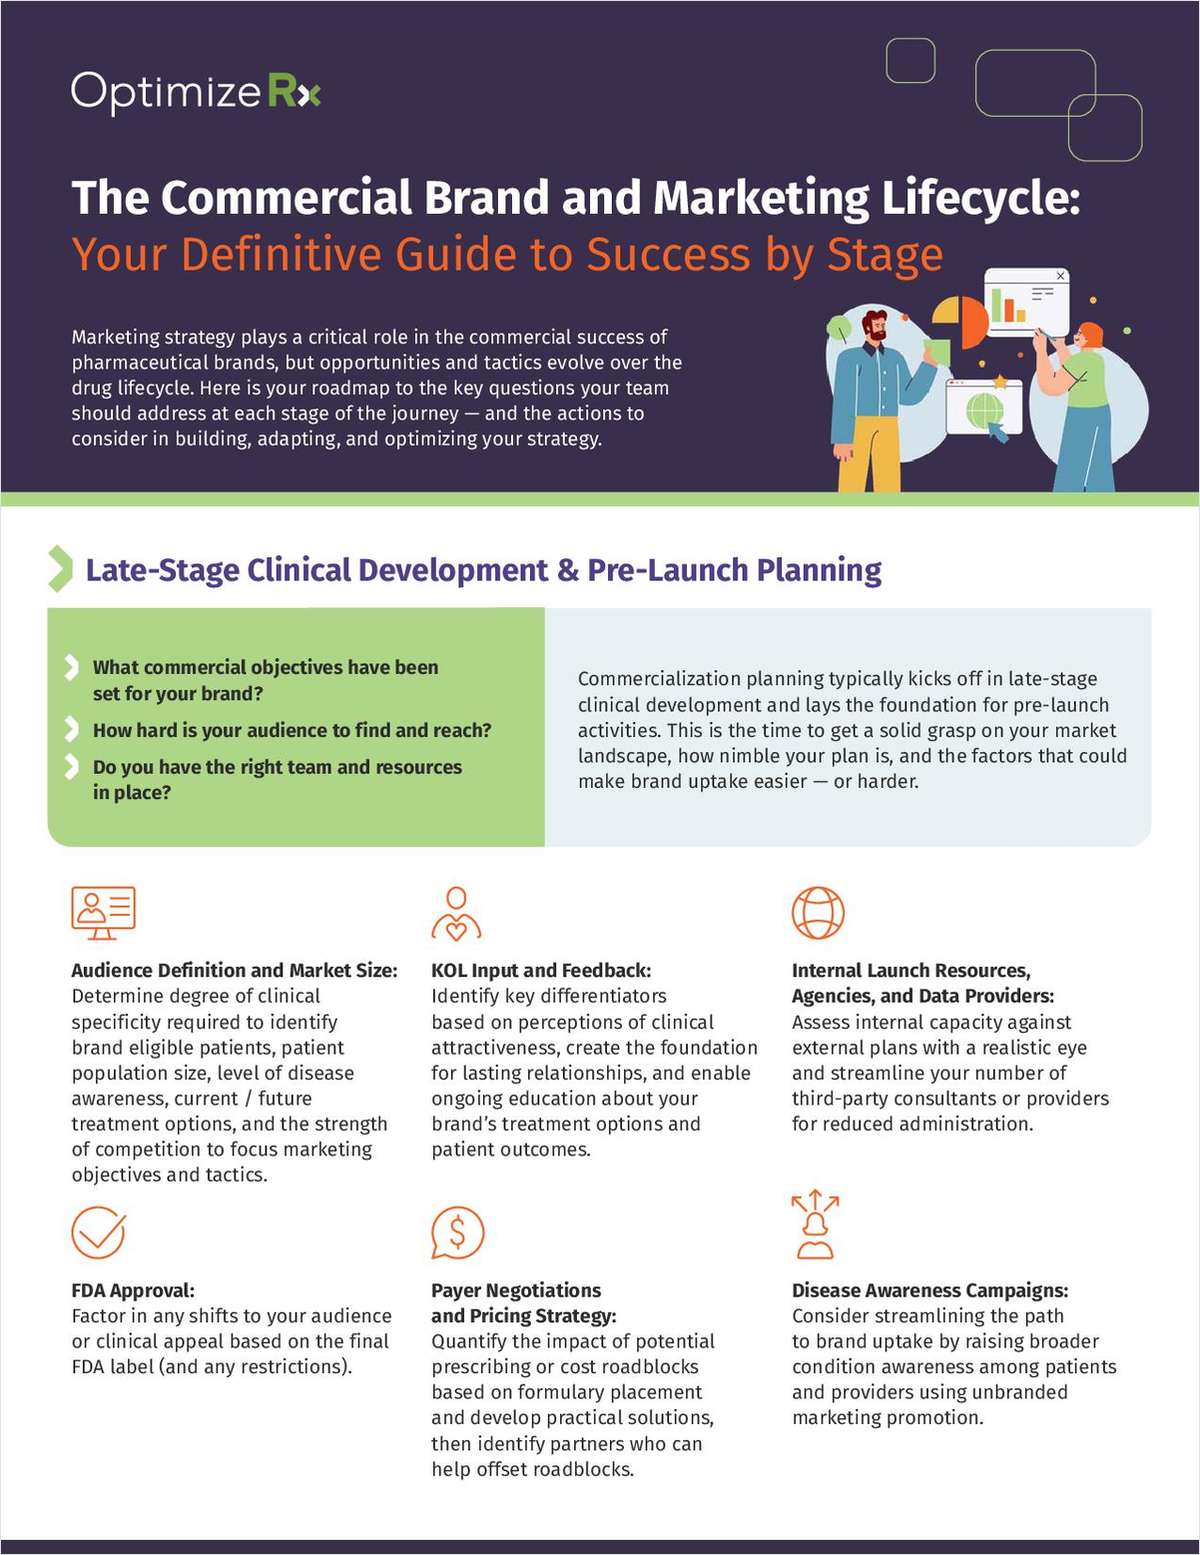 The Commercial Brand and Marketing Lifecycle: Your Definitive Guide to Success by Stage